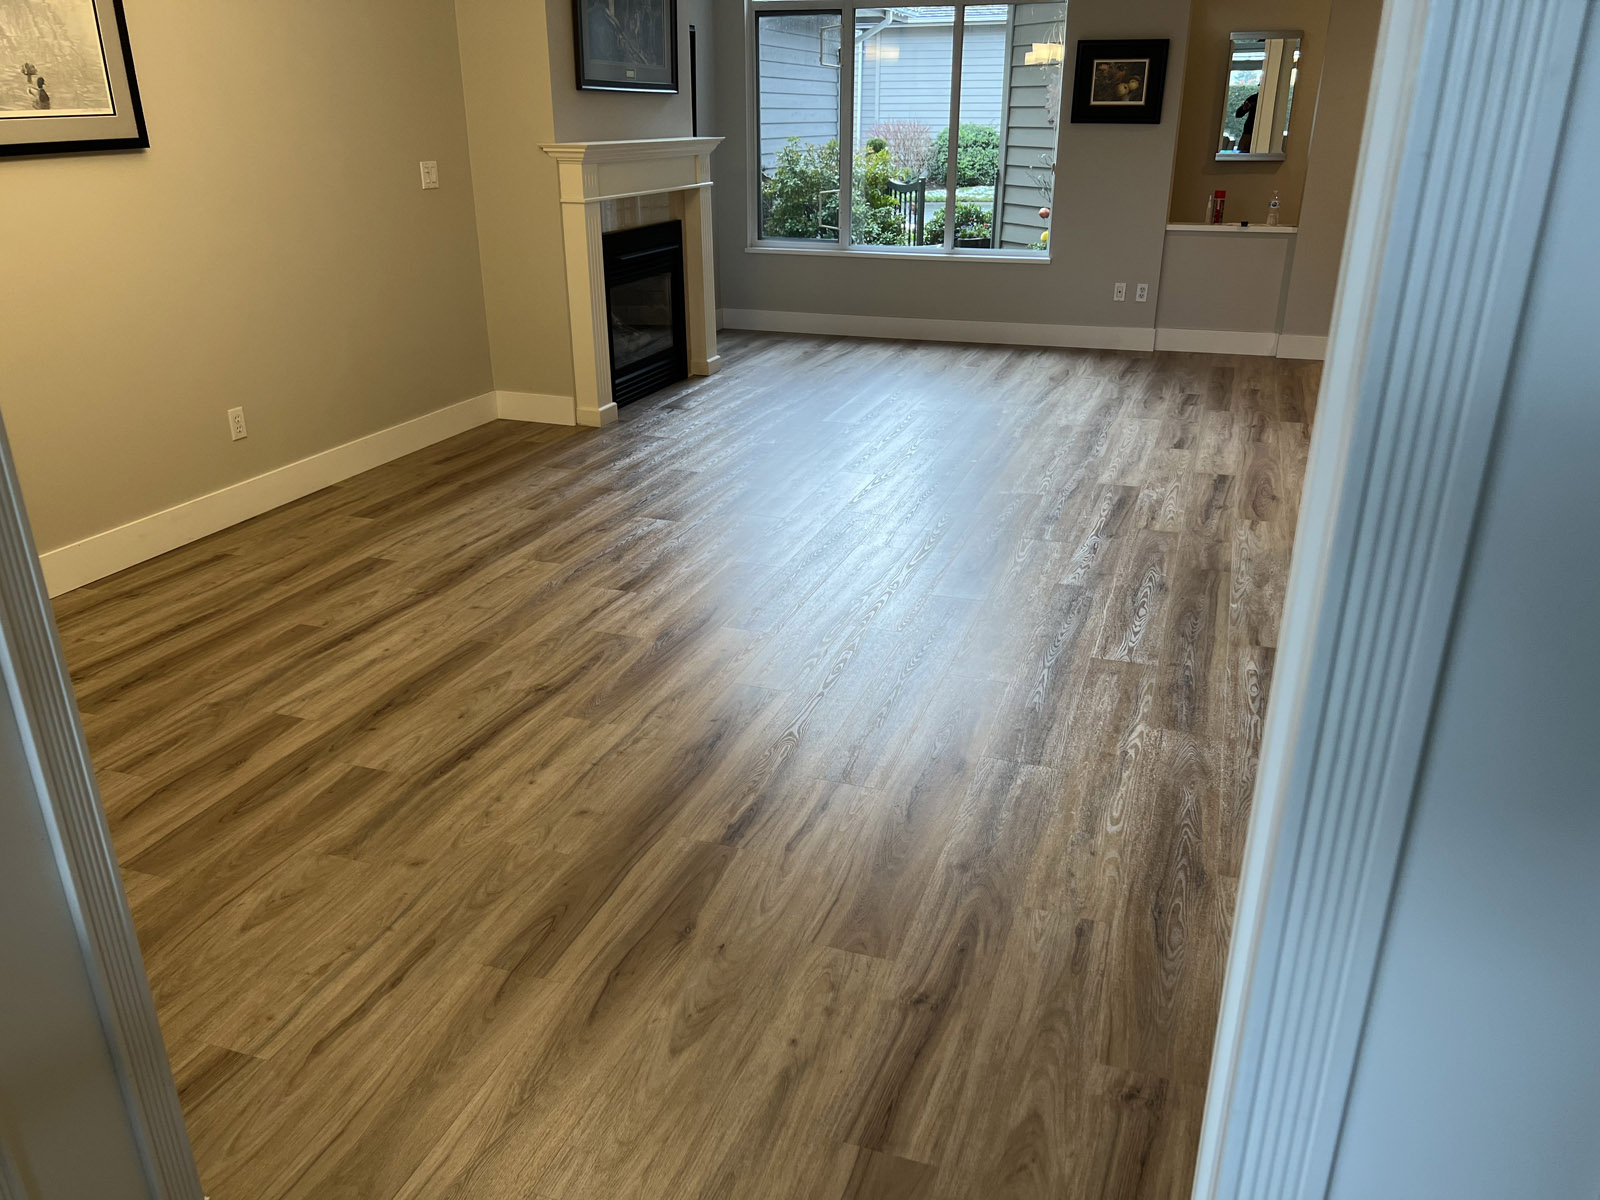 Newly installed vinyl flooring in a house in Vancouver 